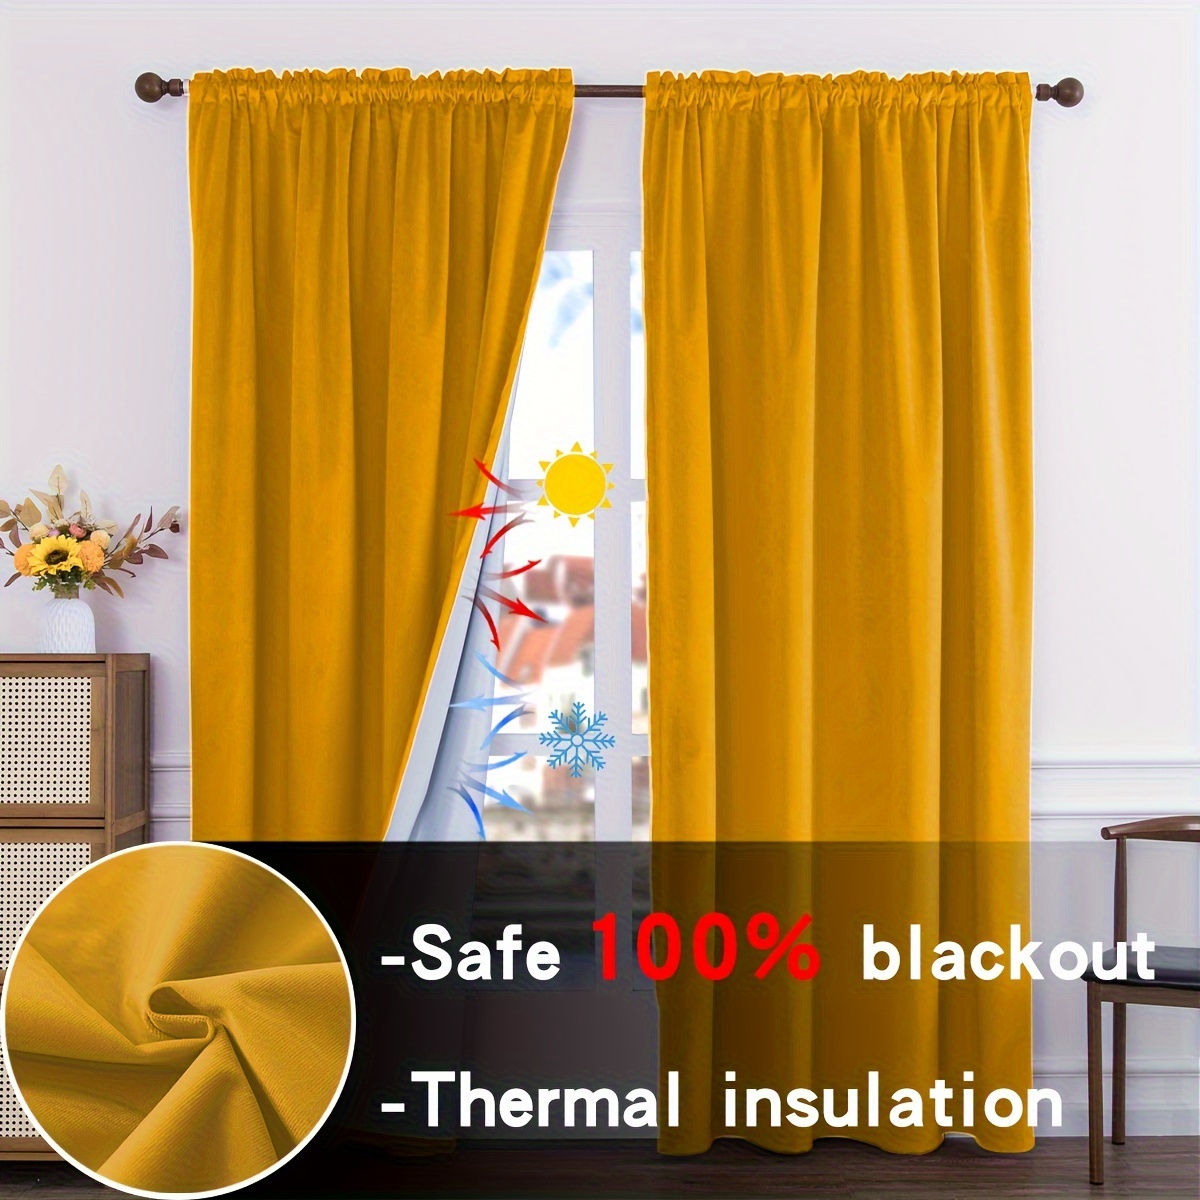 

2pcs Elegant Art Deco Insulated Blackout Curtains, Pole Pocket Design For Living Room & Bedroom, 100% Polyester, Mustard Yellow